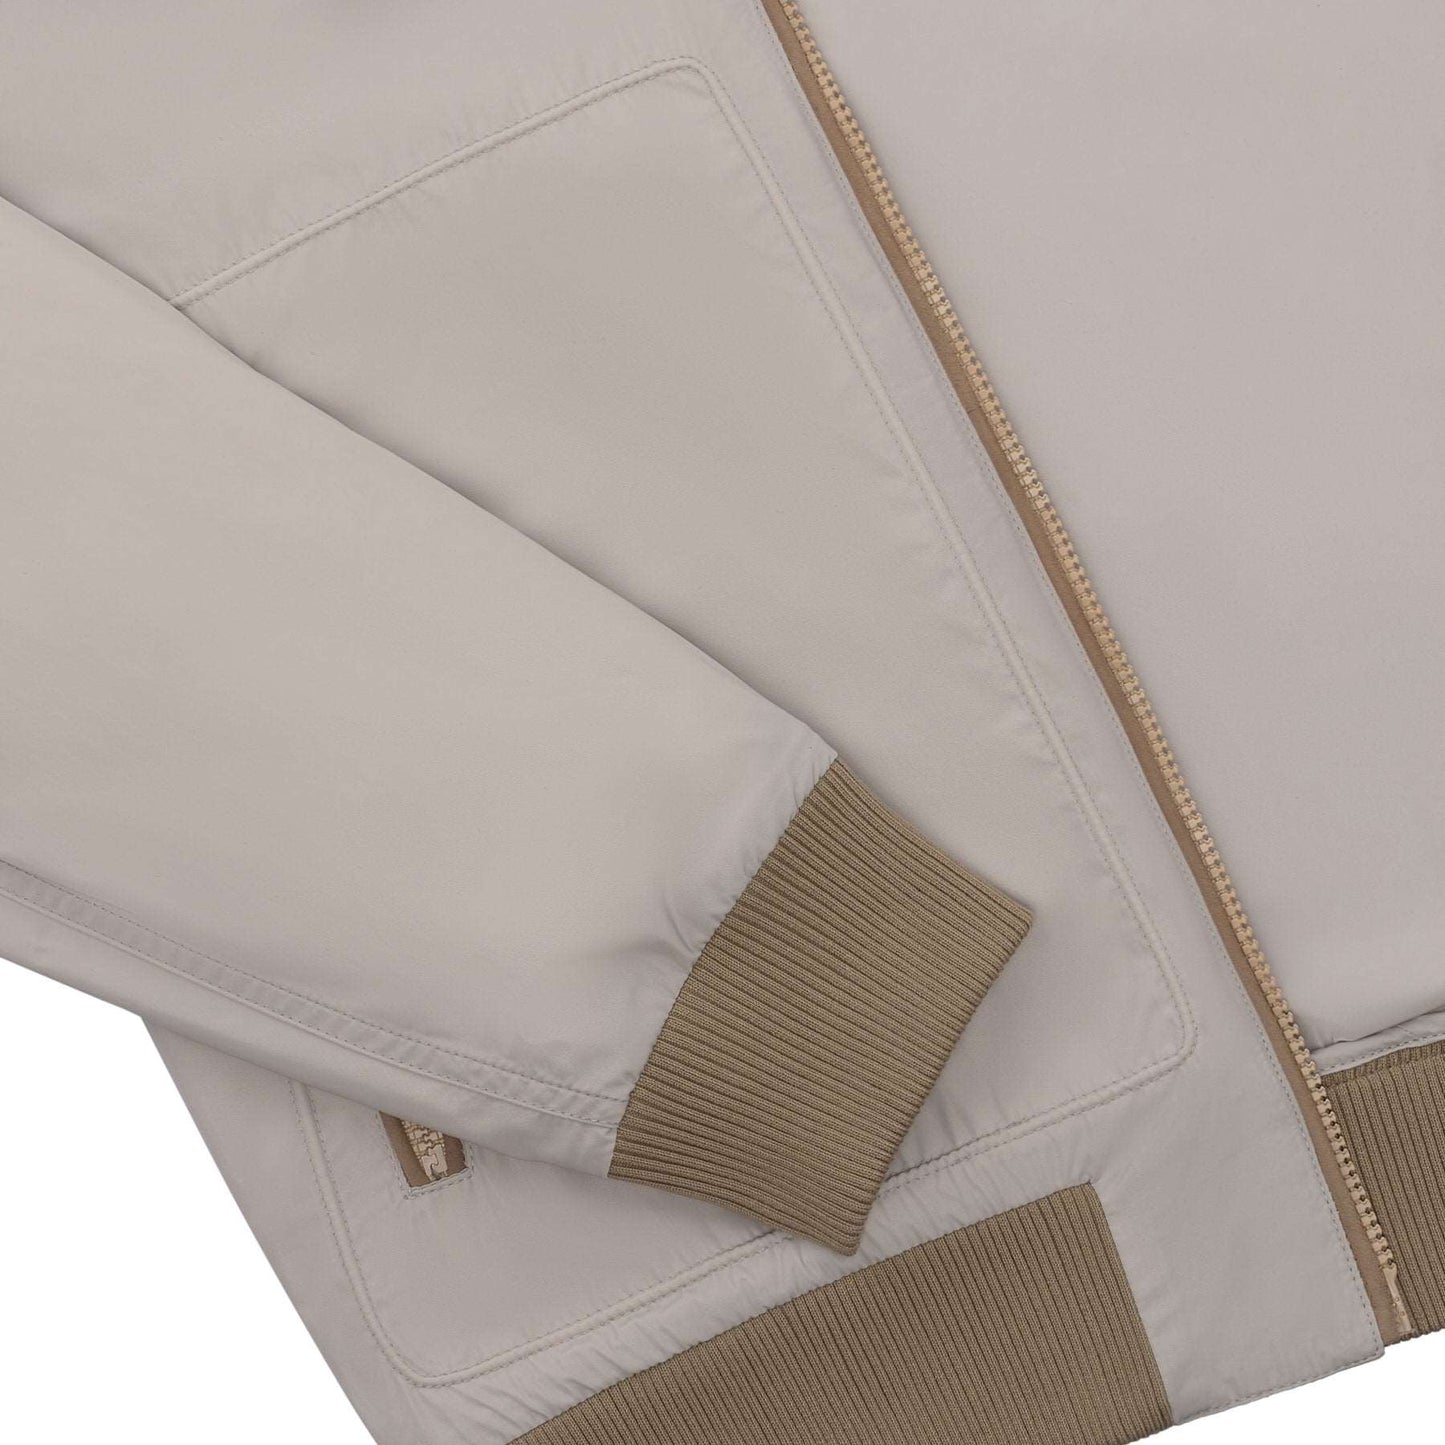 Kiton Bomber Jacket with Leather Details in Light Beige - SARTALE